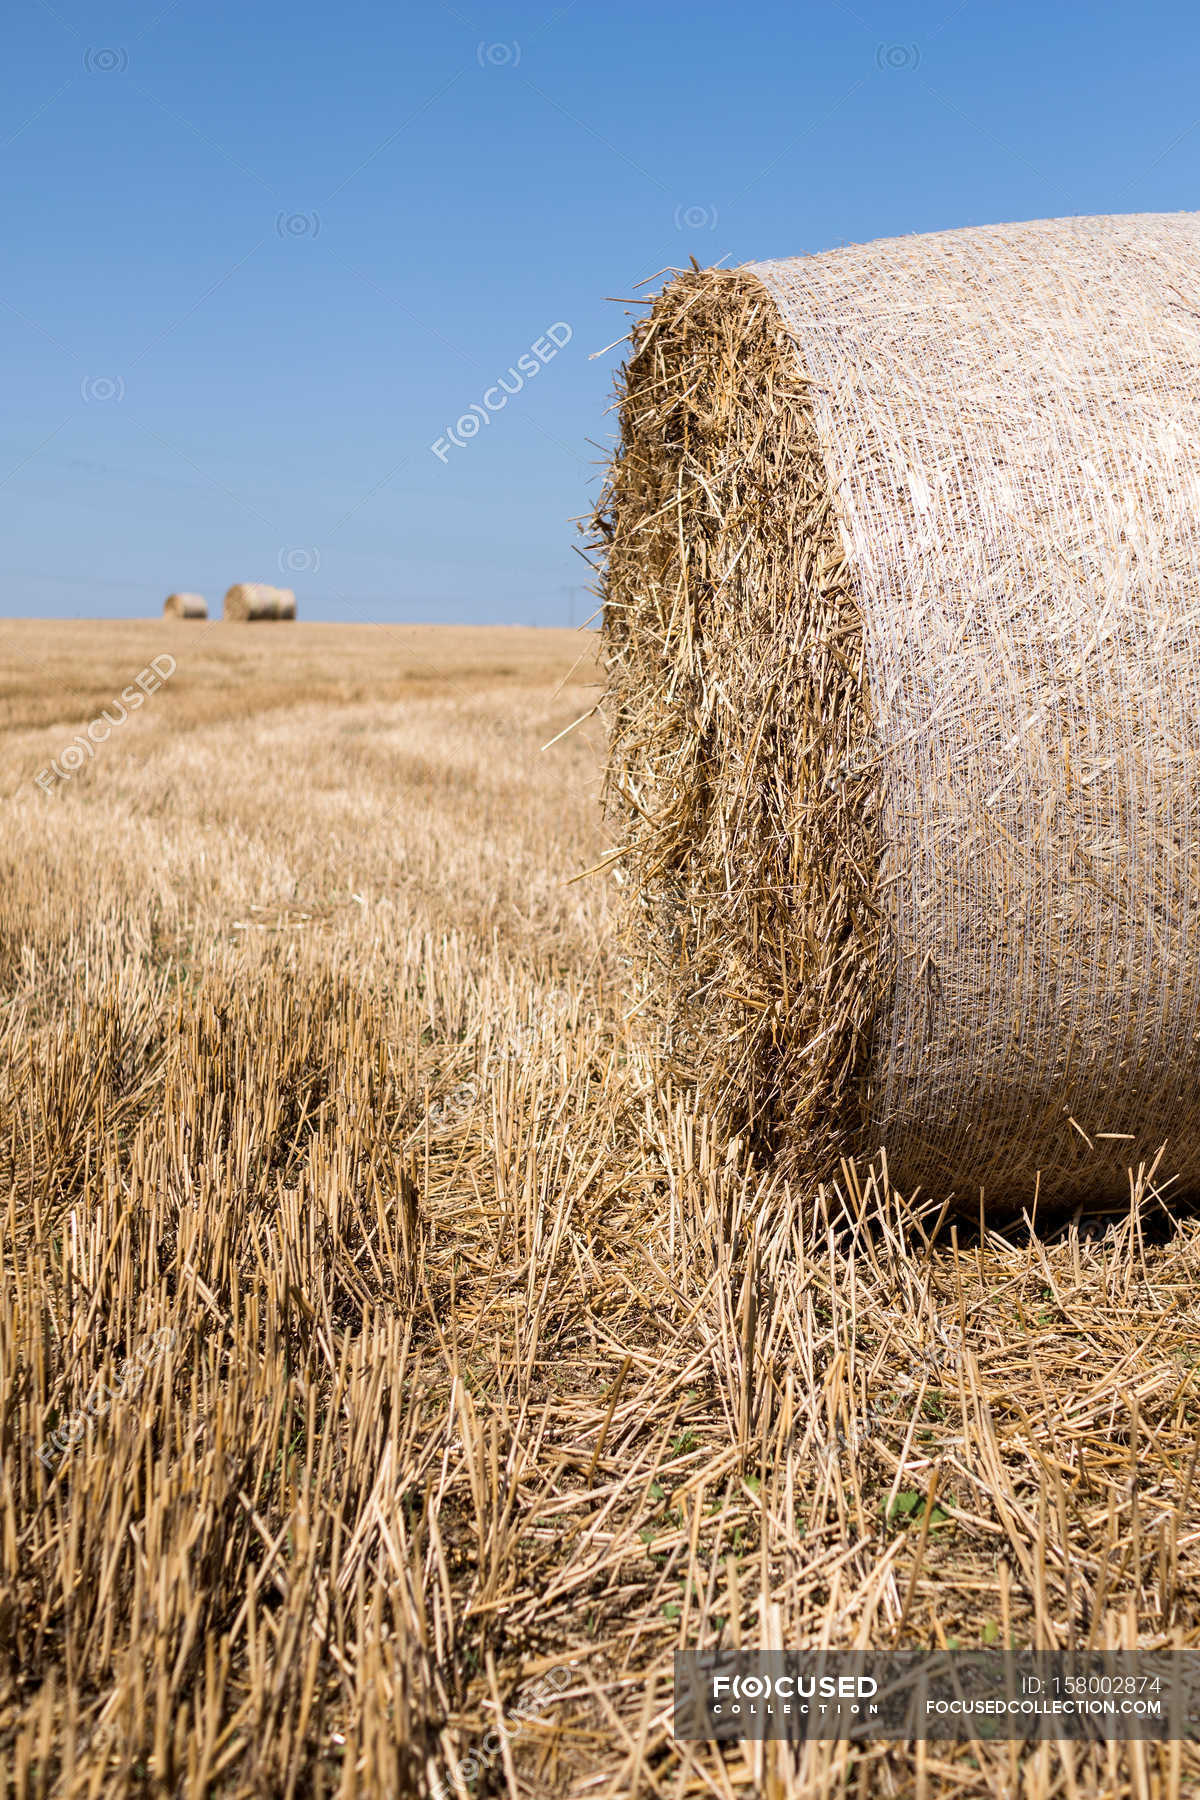 Harvested field and hay rolls — Stock Photo | #158002874